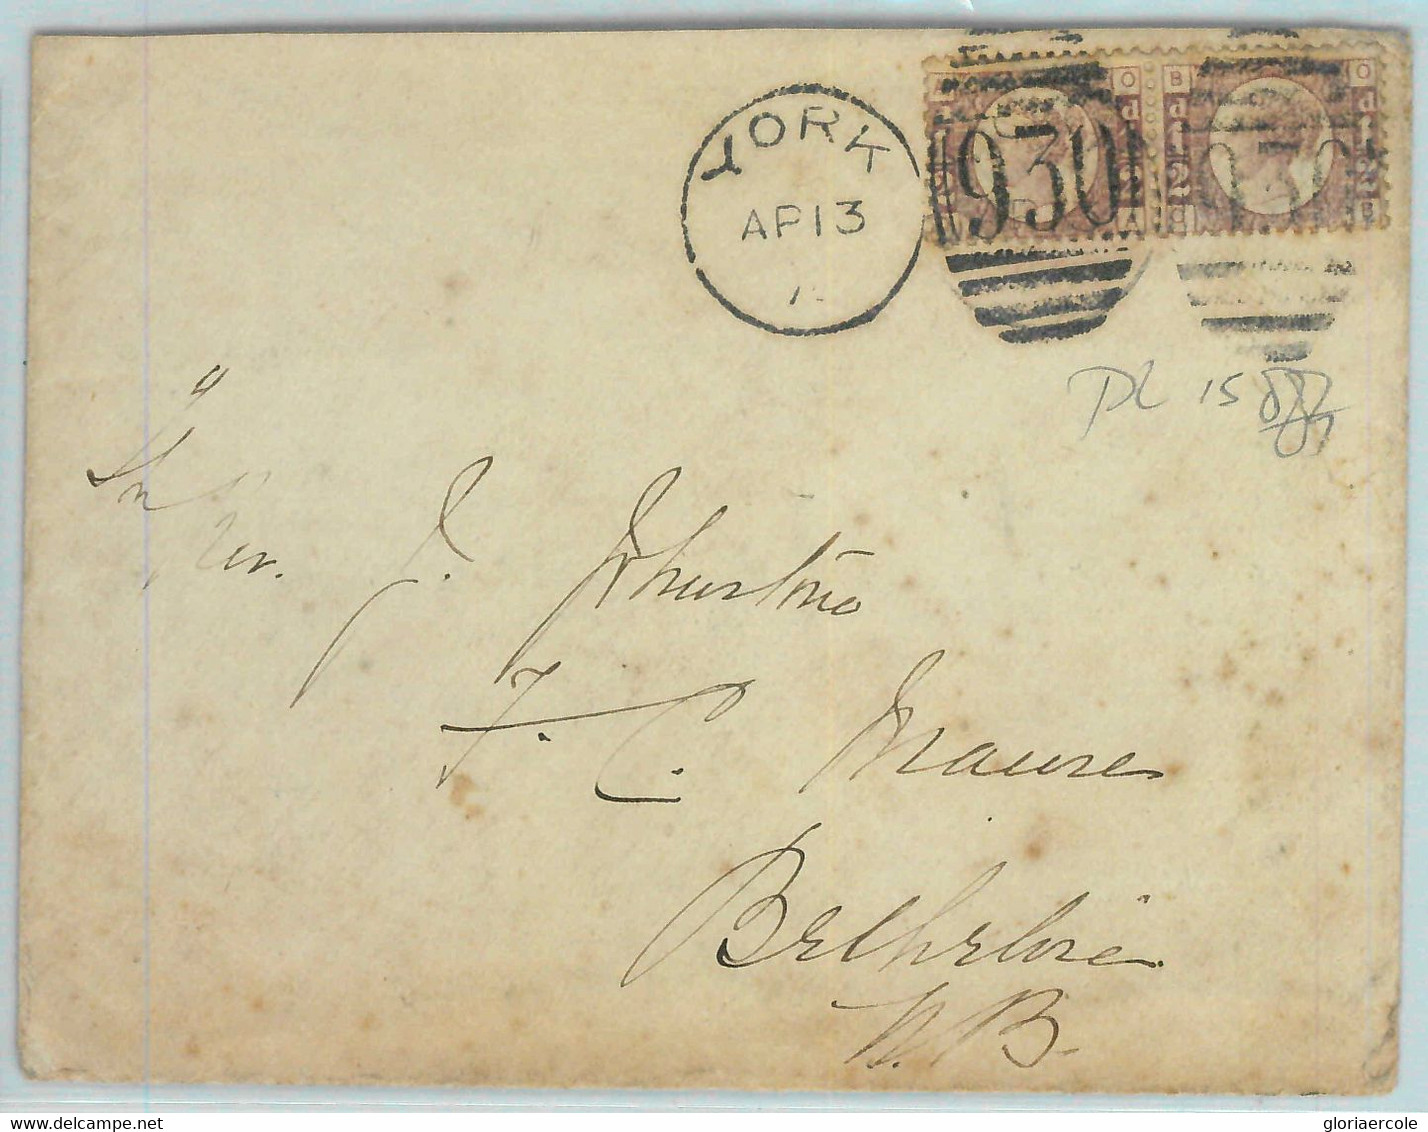 BK0689 - GB - POSTAL HISTORY - 1/2 Penny Plate 15 PAIR On COVER From YORK  1876 - Sin Clasificación